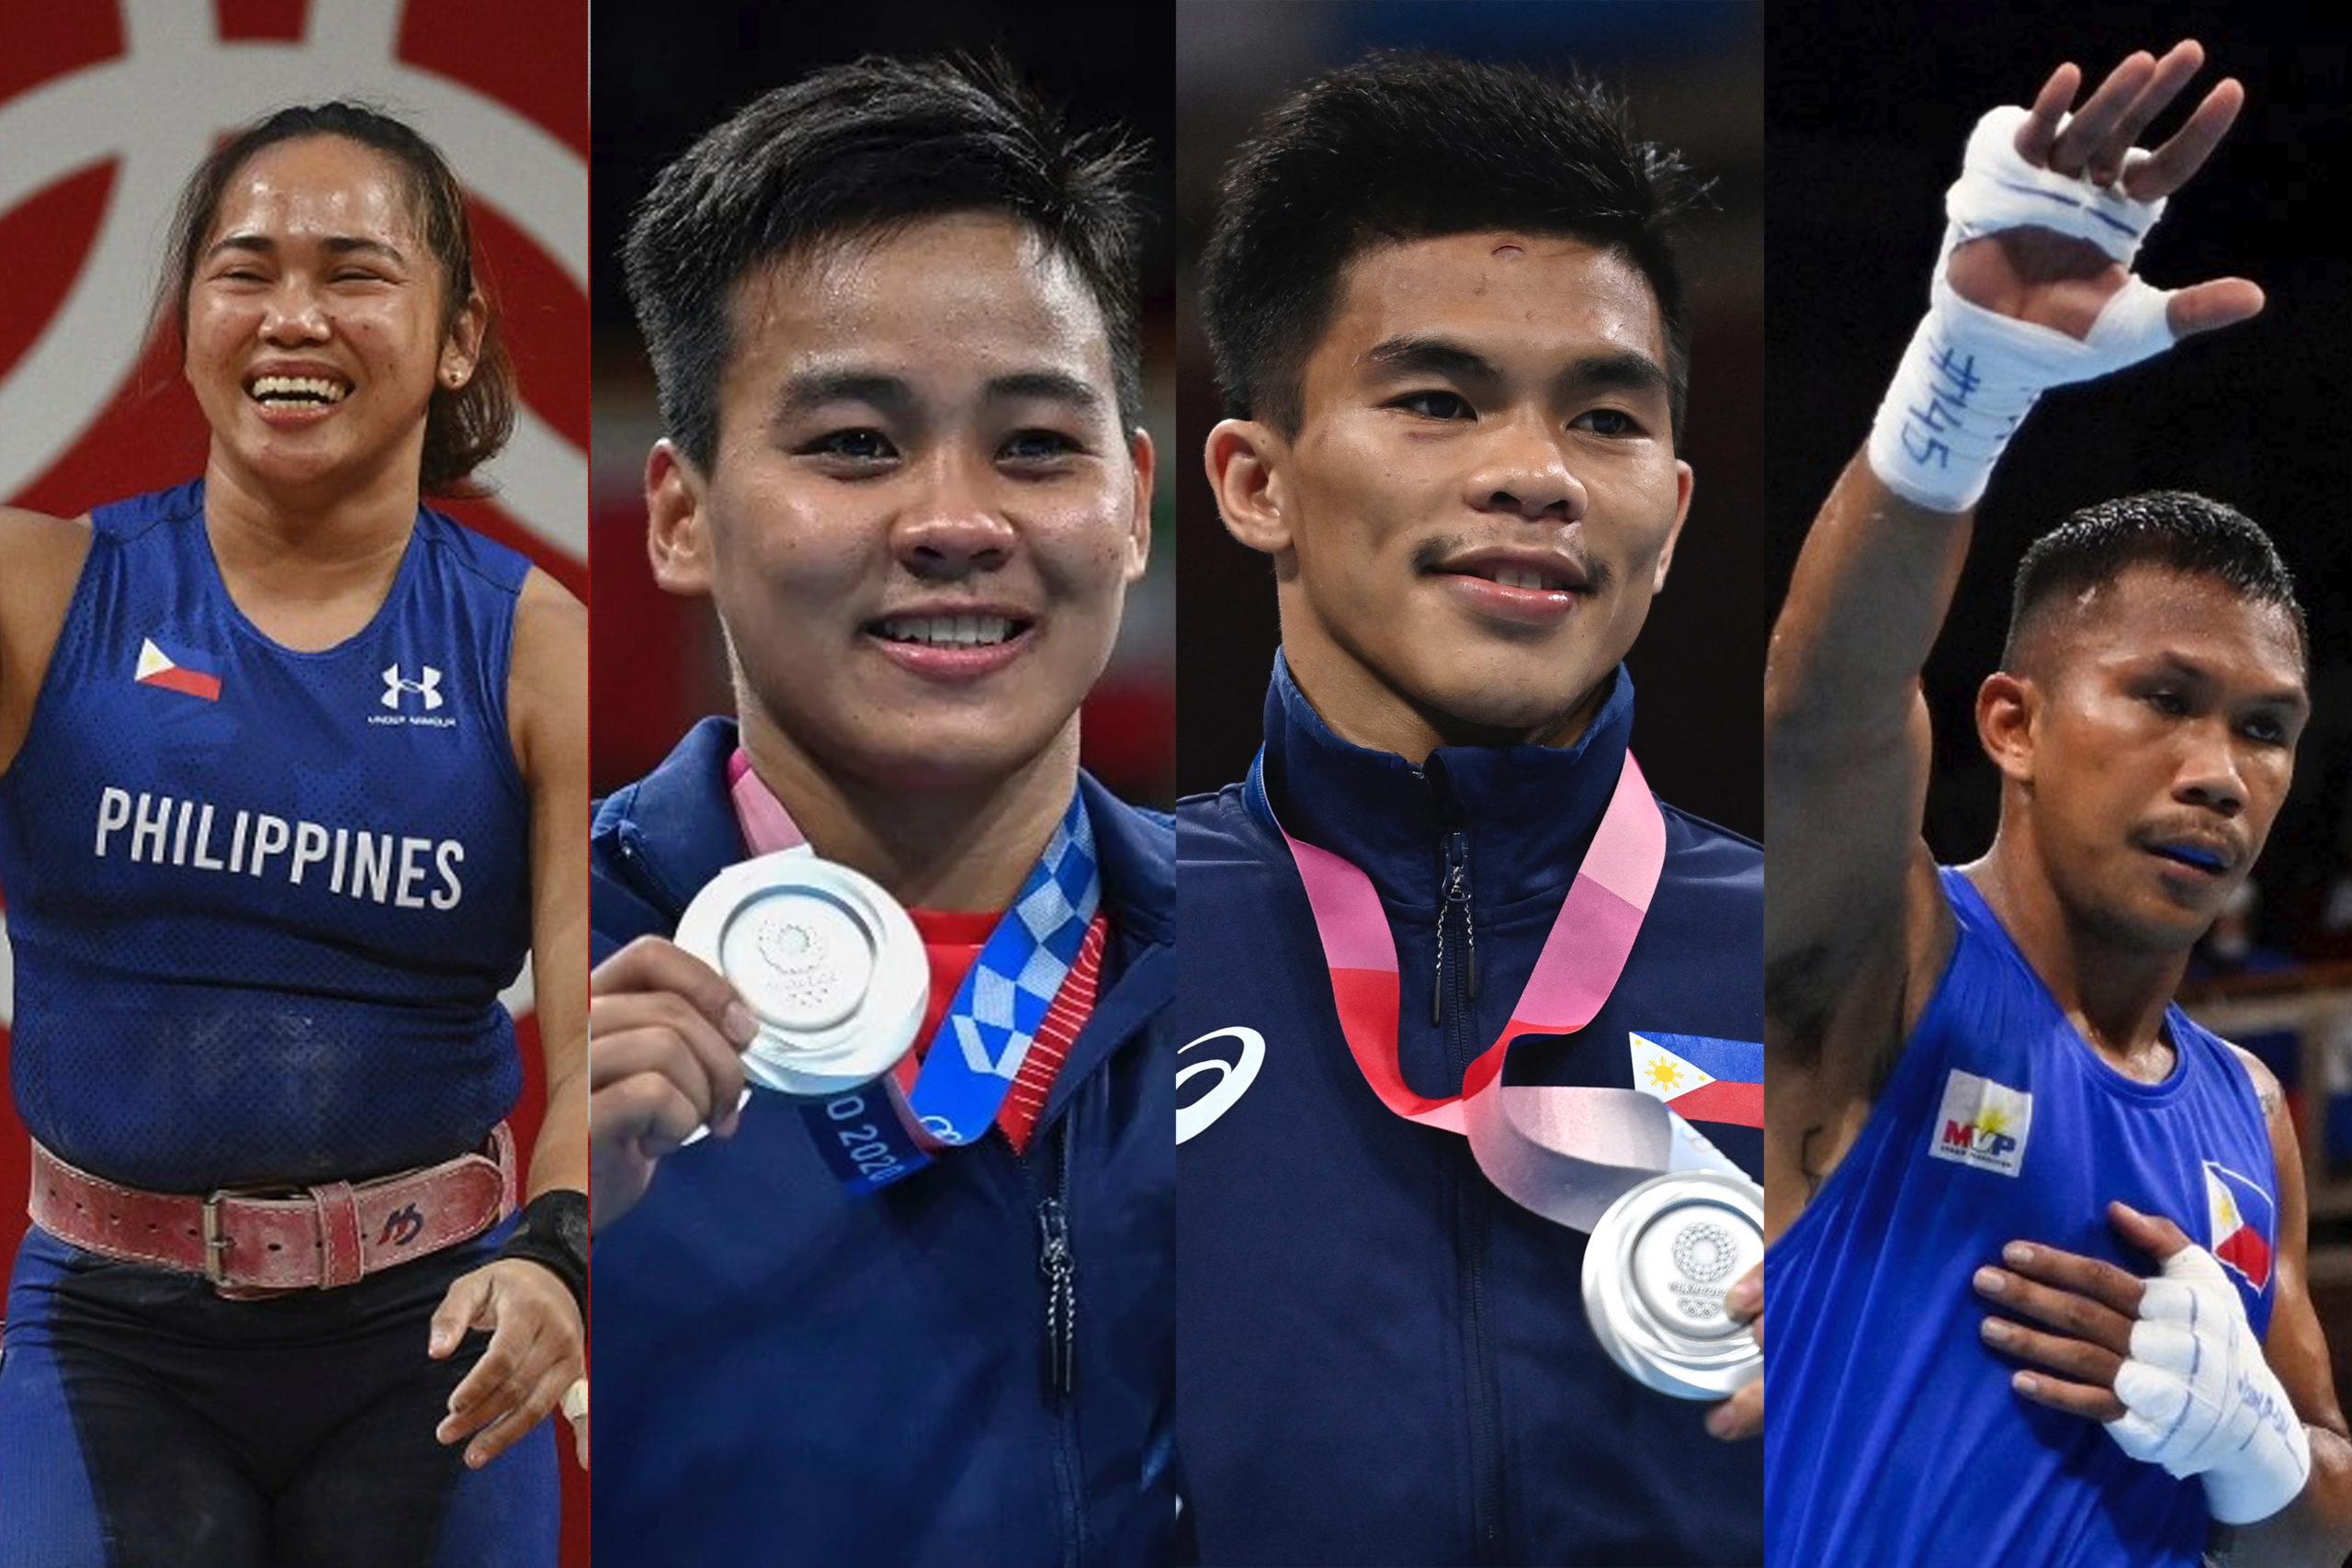 Weightlifting's Hidilyn Diaz (gold), boxing's Nesthy Petecio (silver), Carlo Paalam (silver) and Eumir Marcial (bronze).